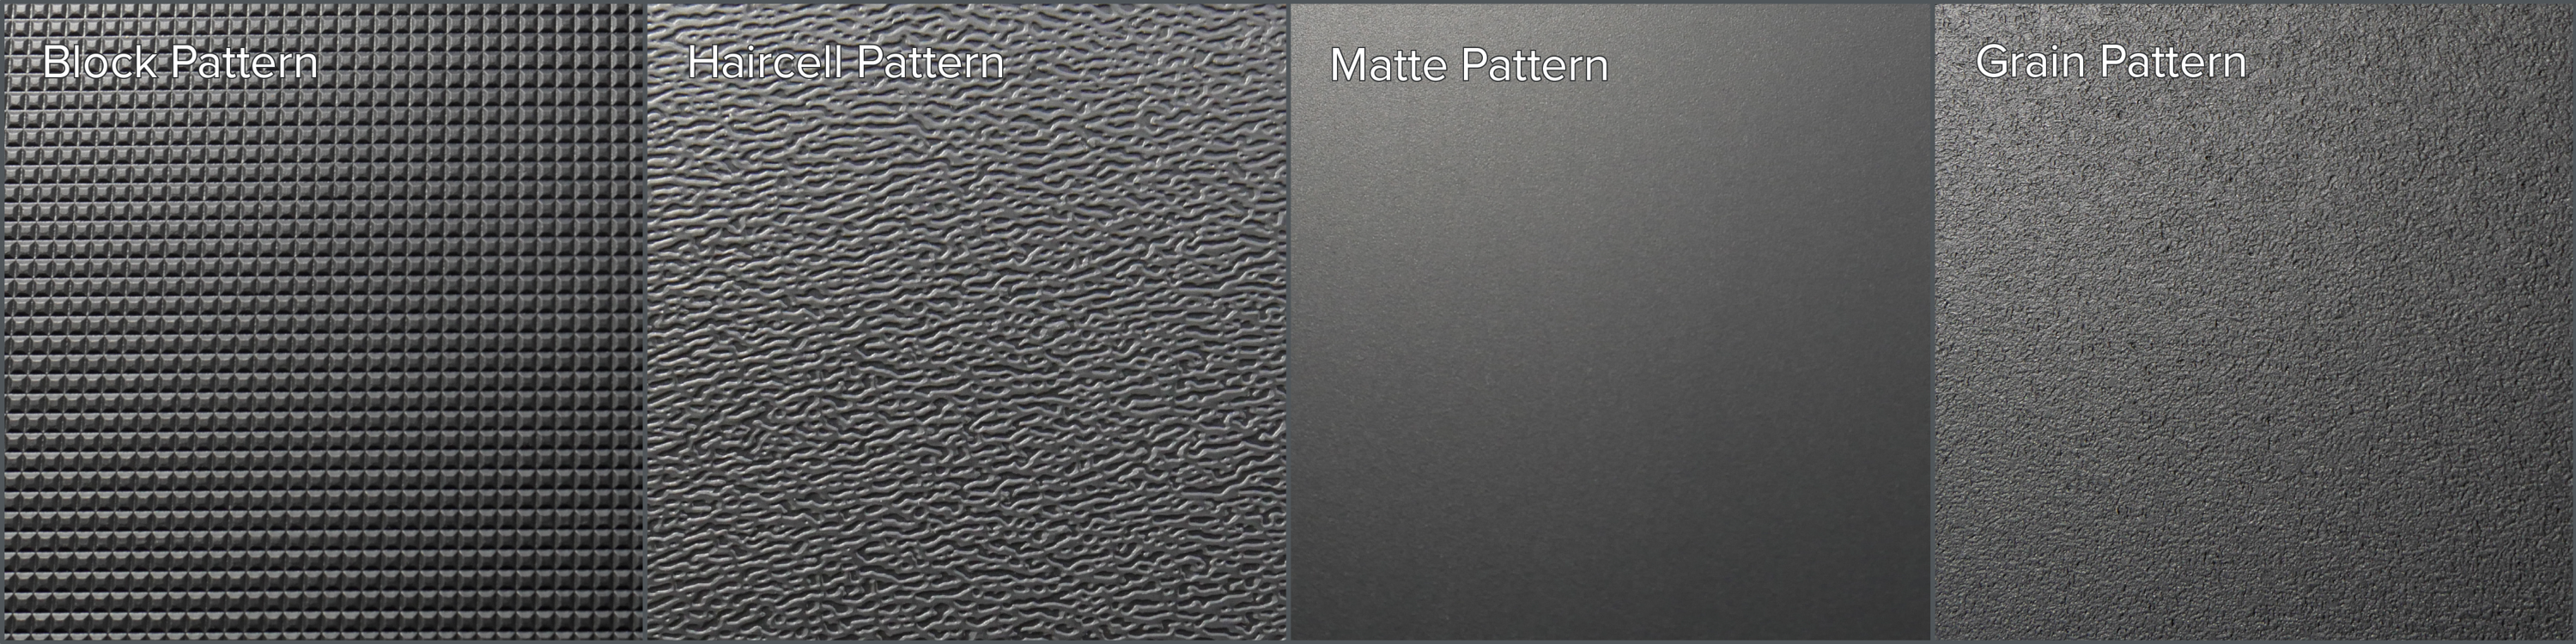 Image of four patterns Sherwood provides. Block, haircell, matte and grain patterns.